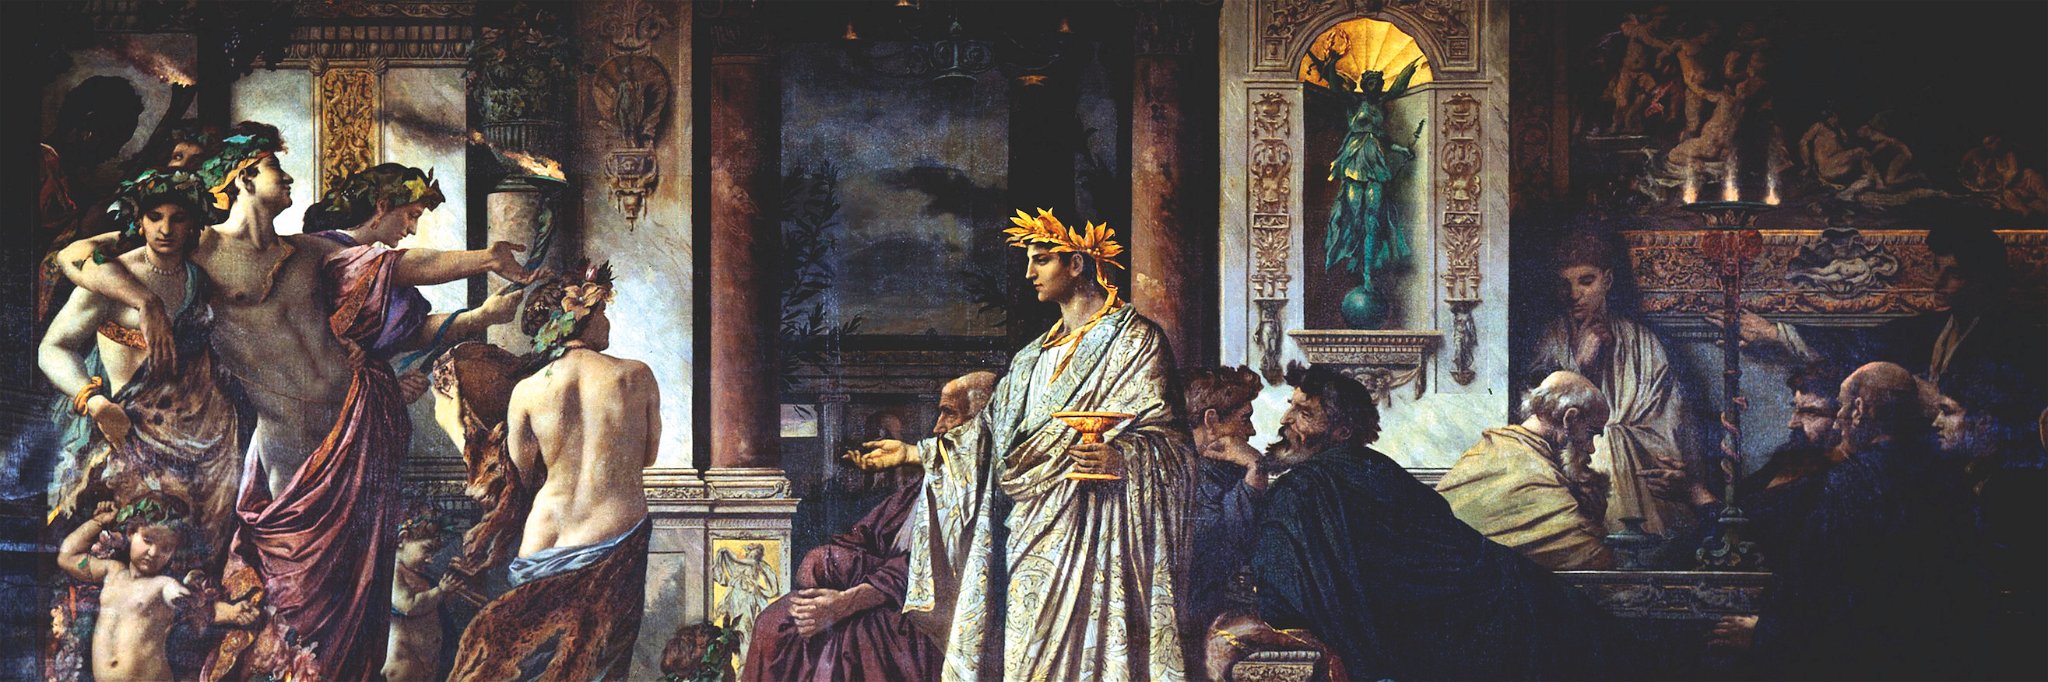 The Symposium by Anselm Feuerbach.